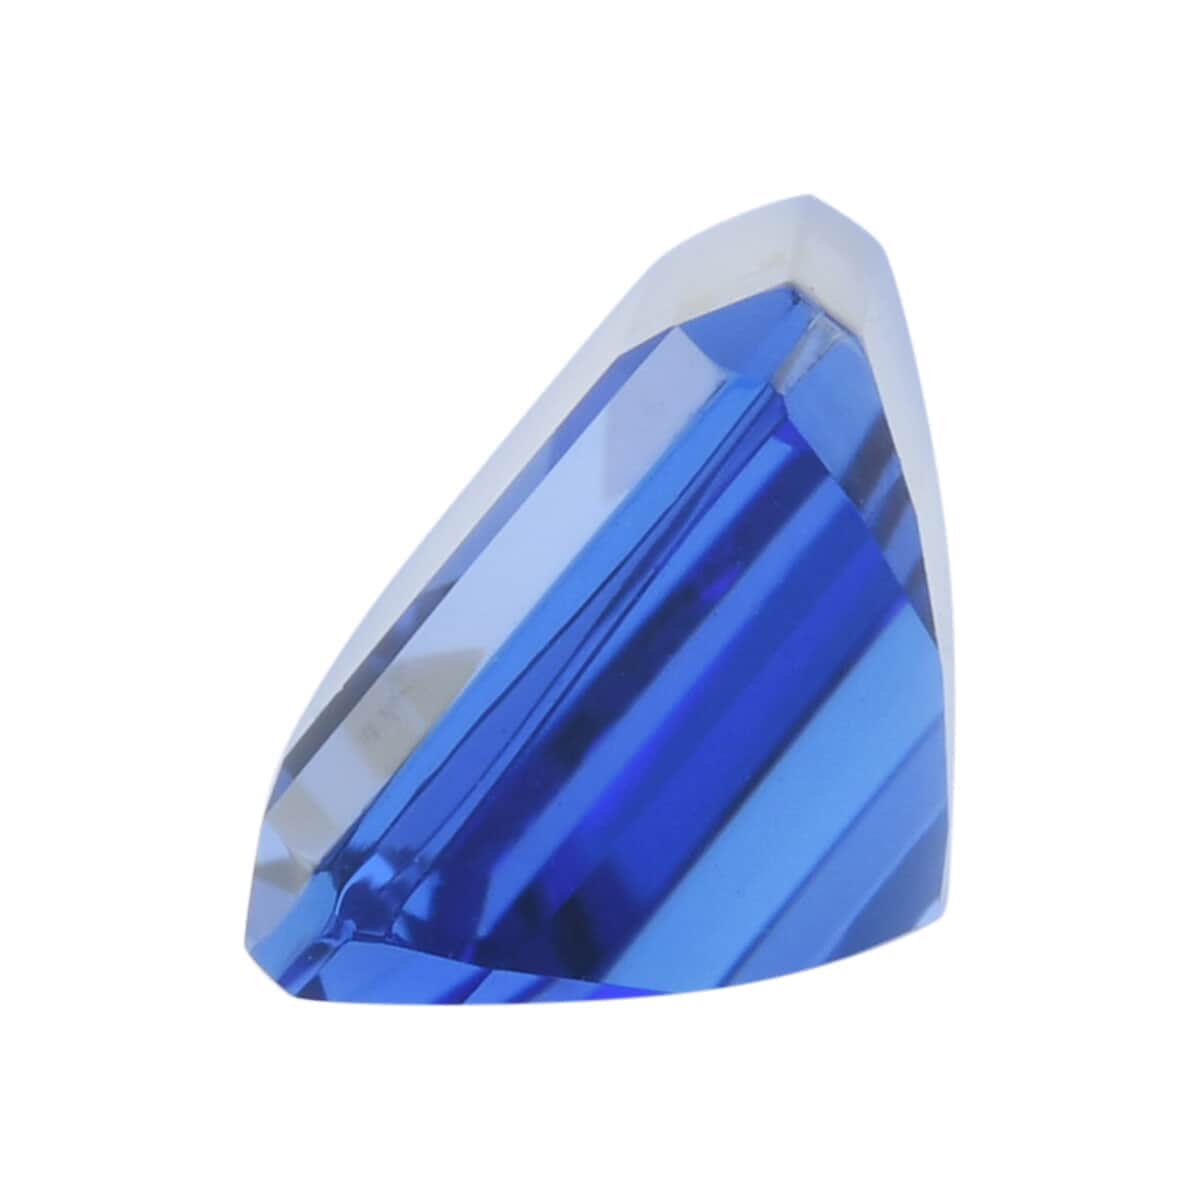 Certified and Appraised AAAA Vivid Tanzanite (Oct Free Size) 5.00 ctw, Loose Gemstone For Jewelry Making, Octagon Free Size Tanzanite Gem, Tanzanite Stone For Jewelry image number 1